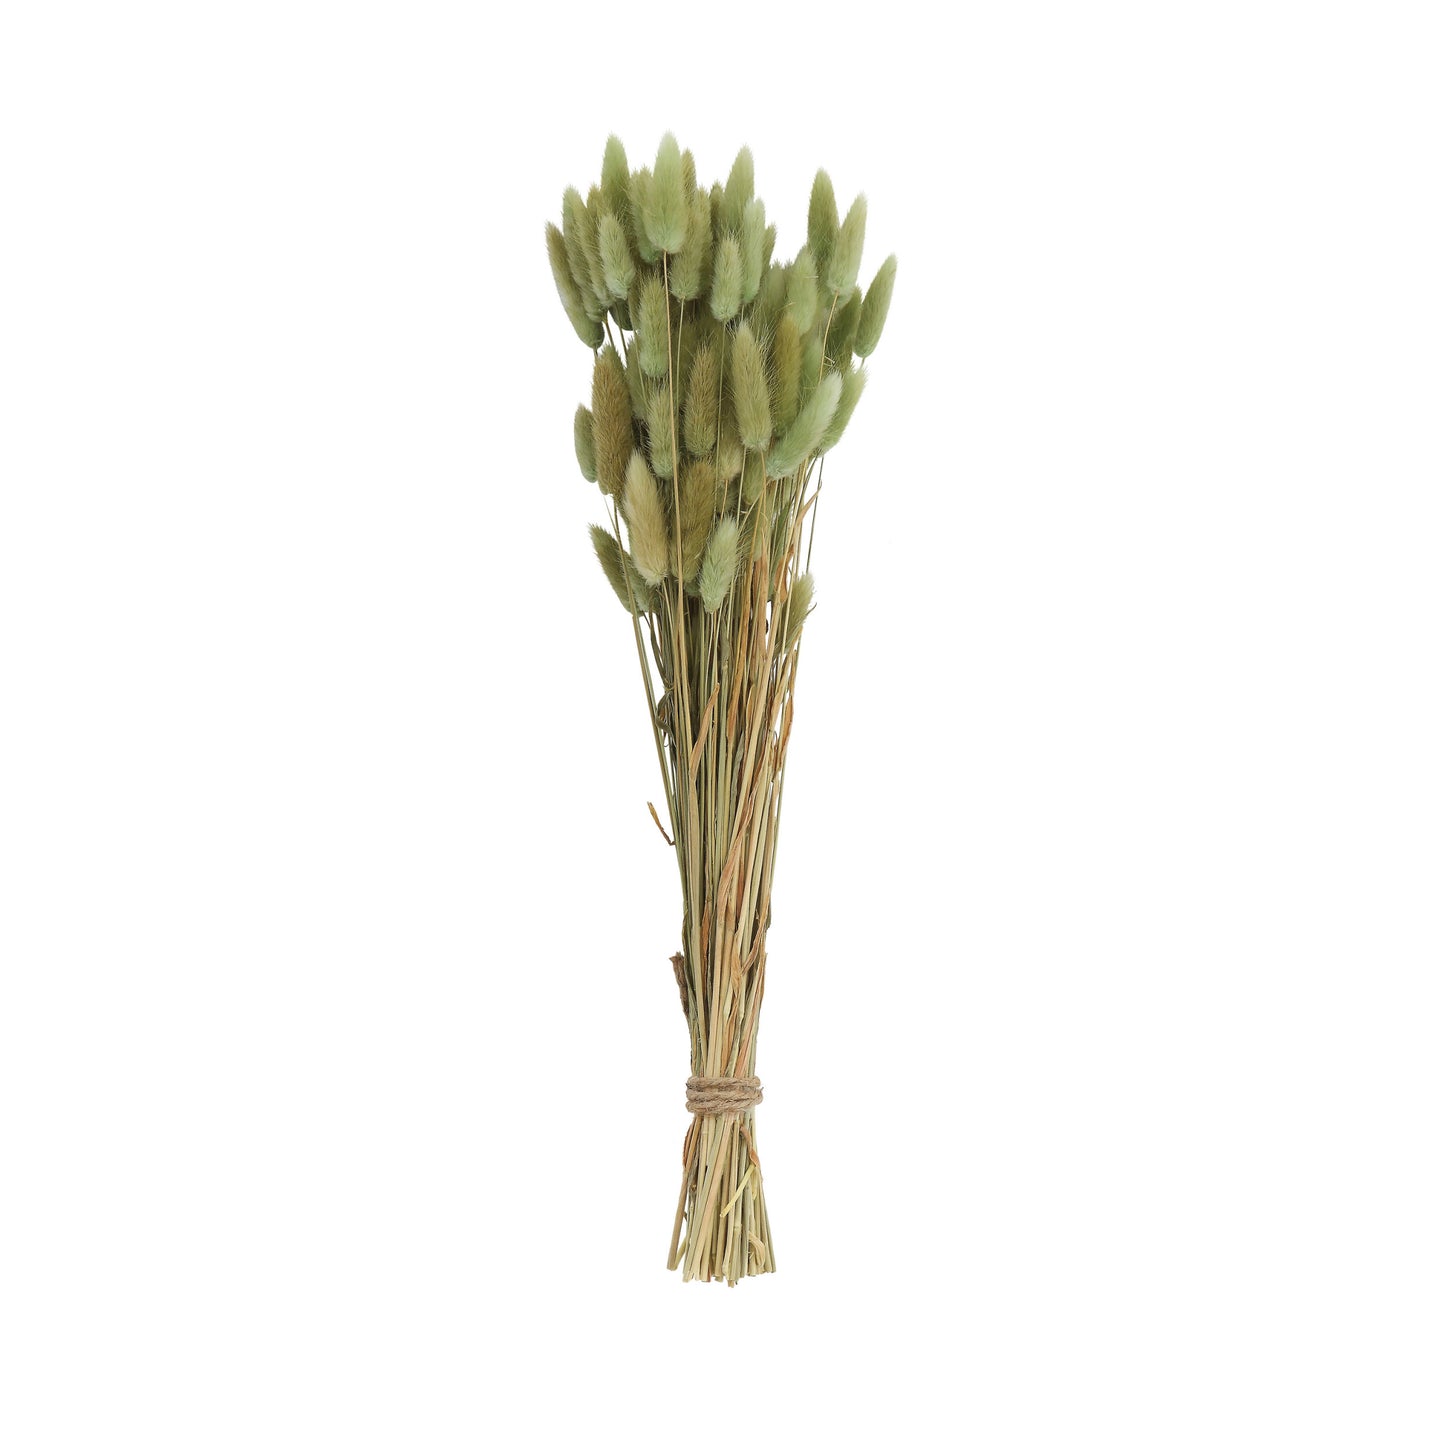 Stem-Dried Natural Bunny Tail Grass